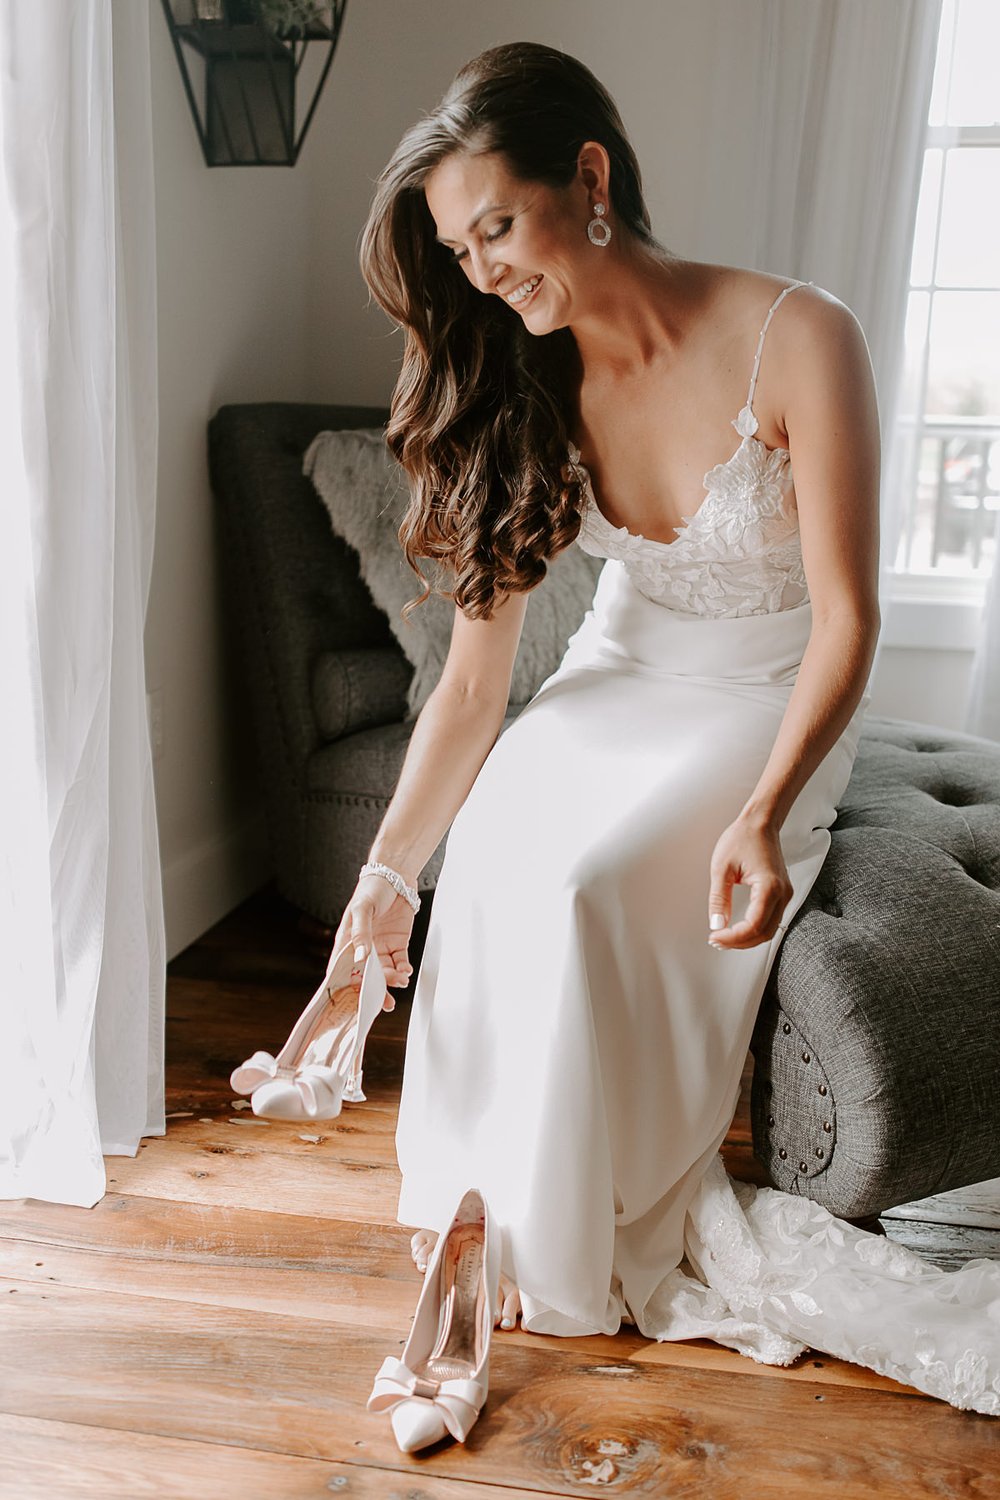 Bride puts on shoes while getting ready for wedding